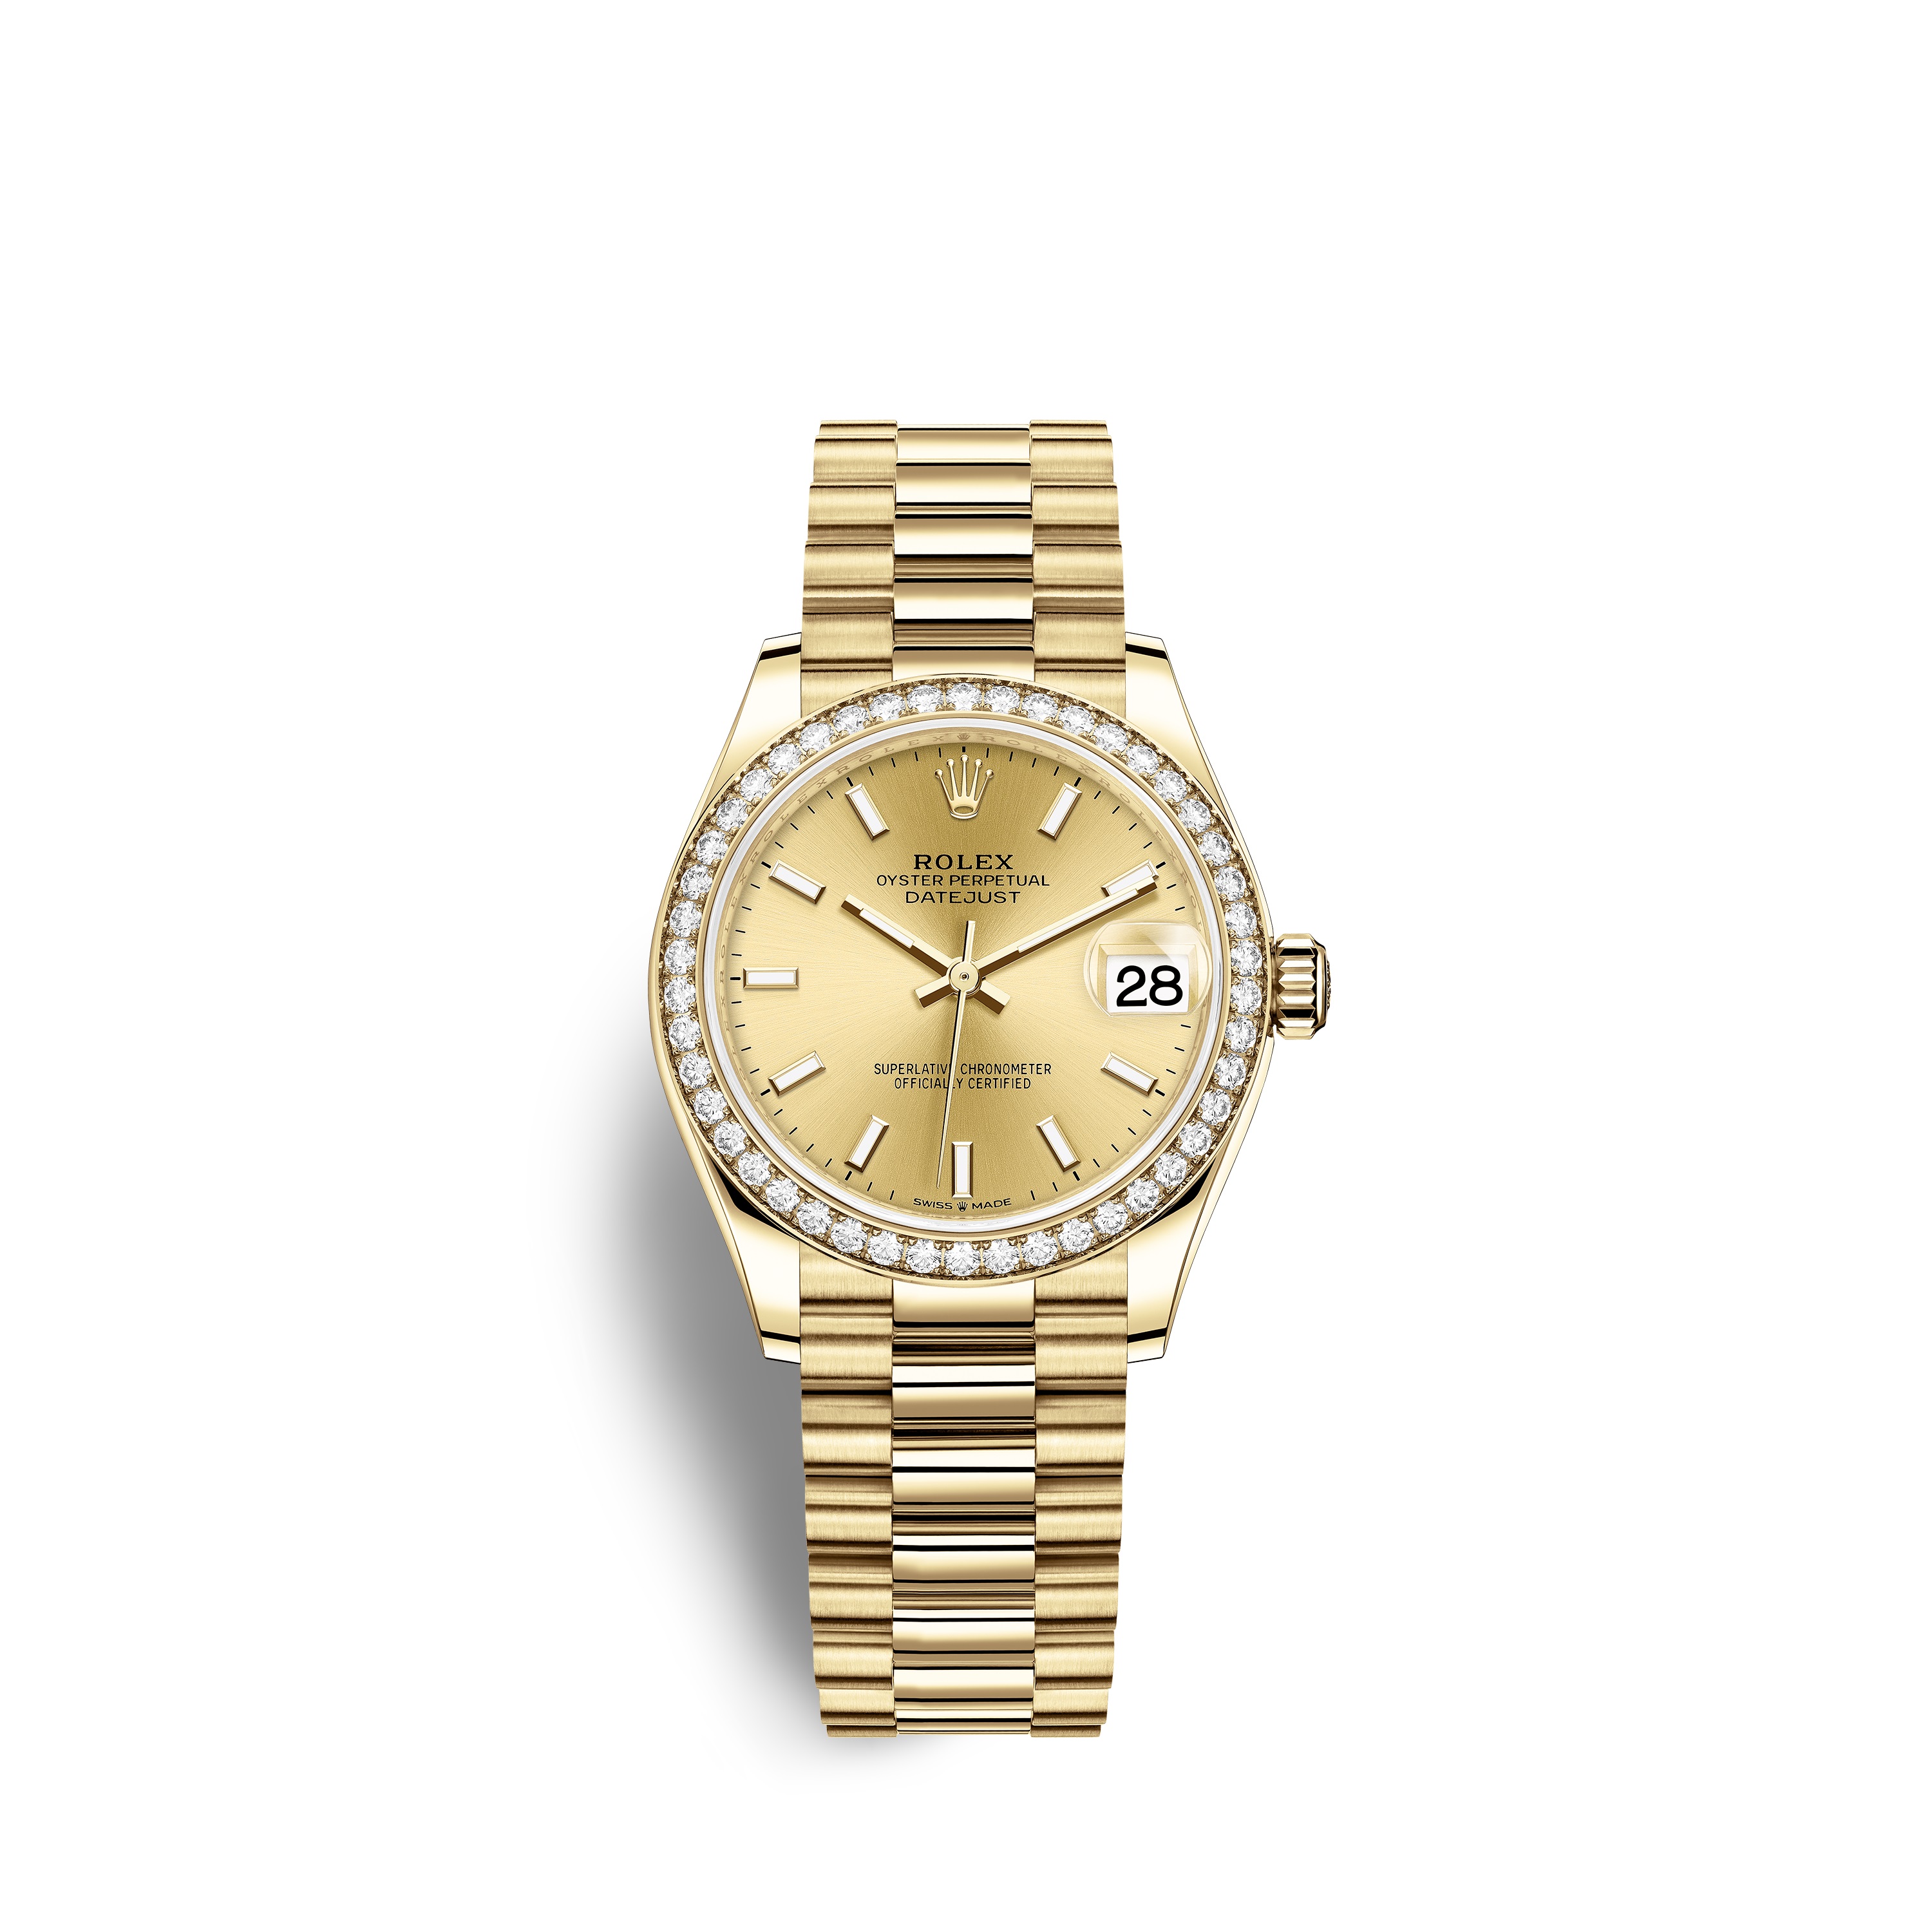 Datejust 31 278288RBR Gold & Diamonds Watch (Champagne-Colour)